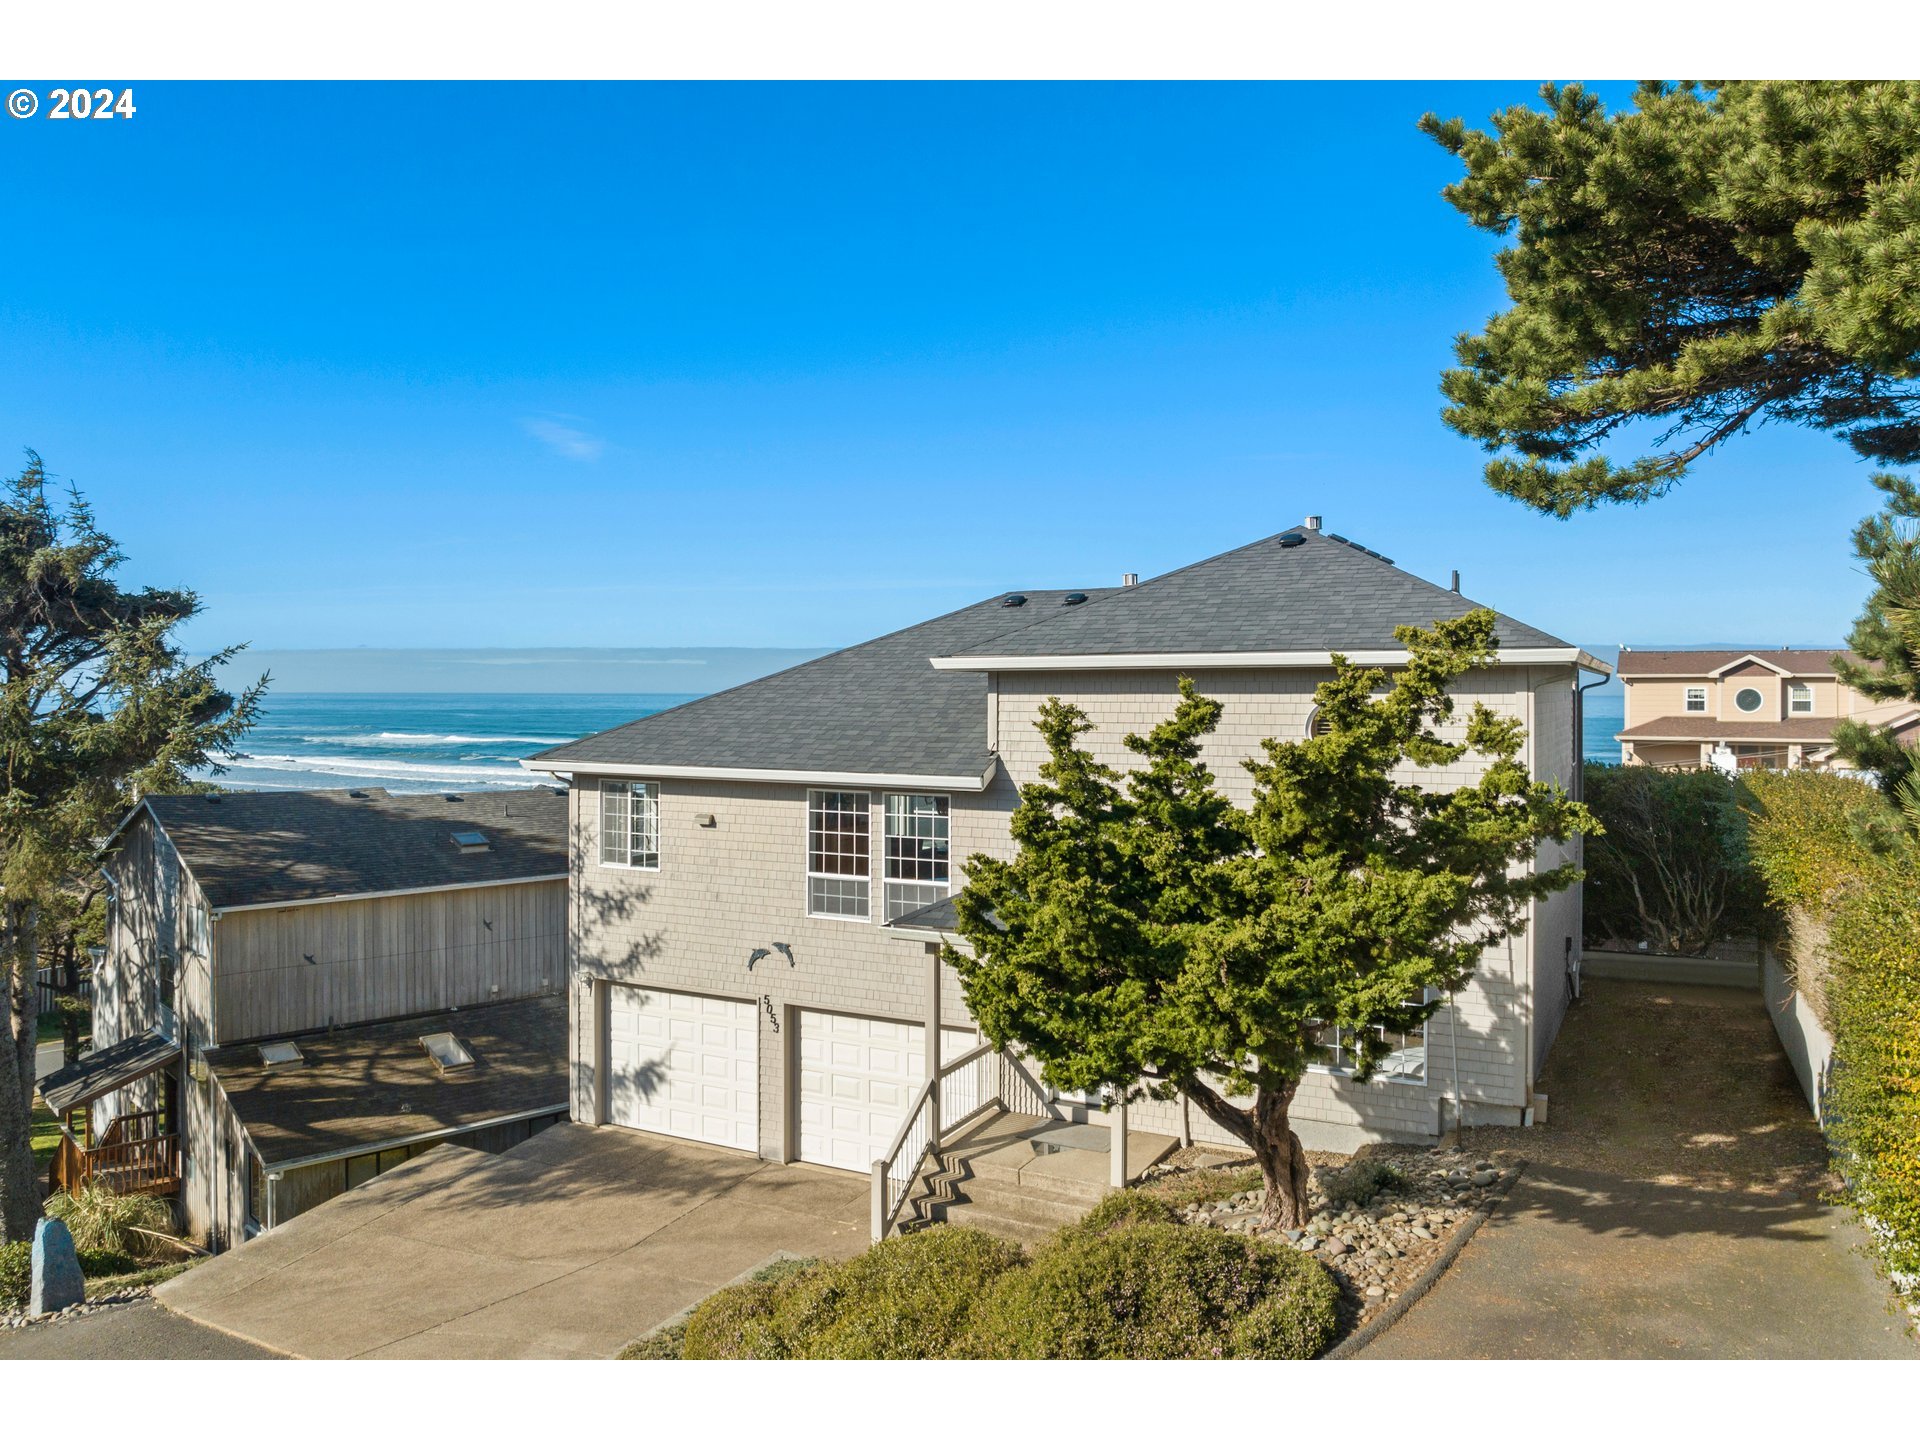 5053 NW KEEL AVE, Lincoln City, OR 